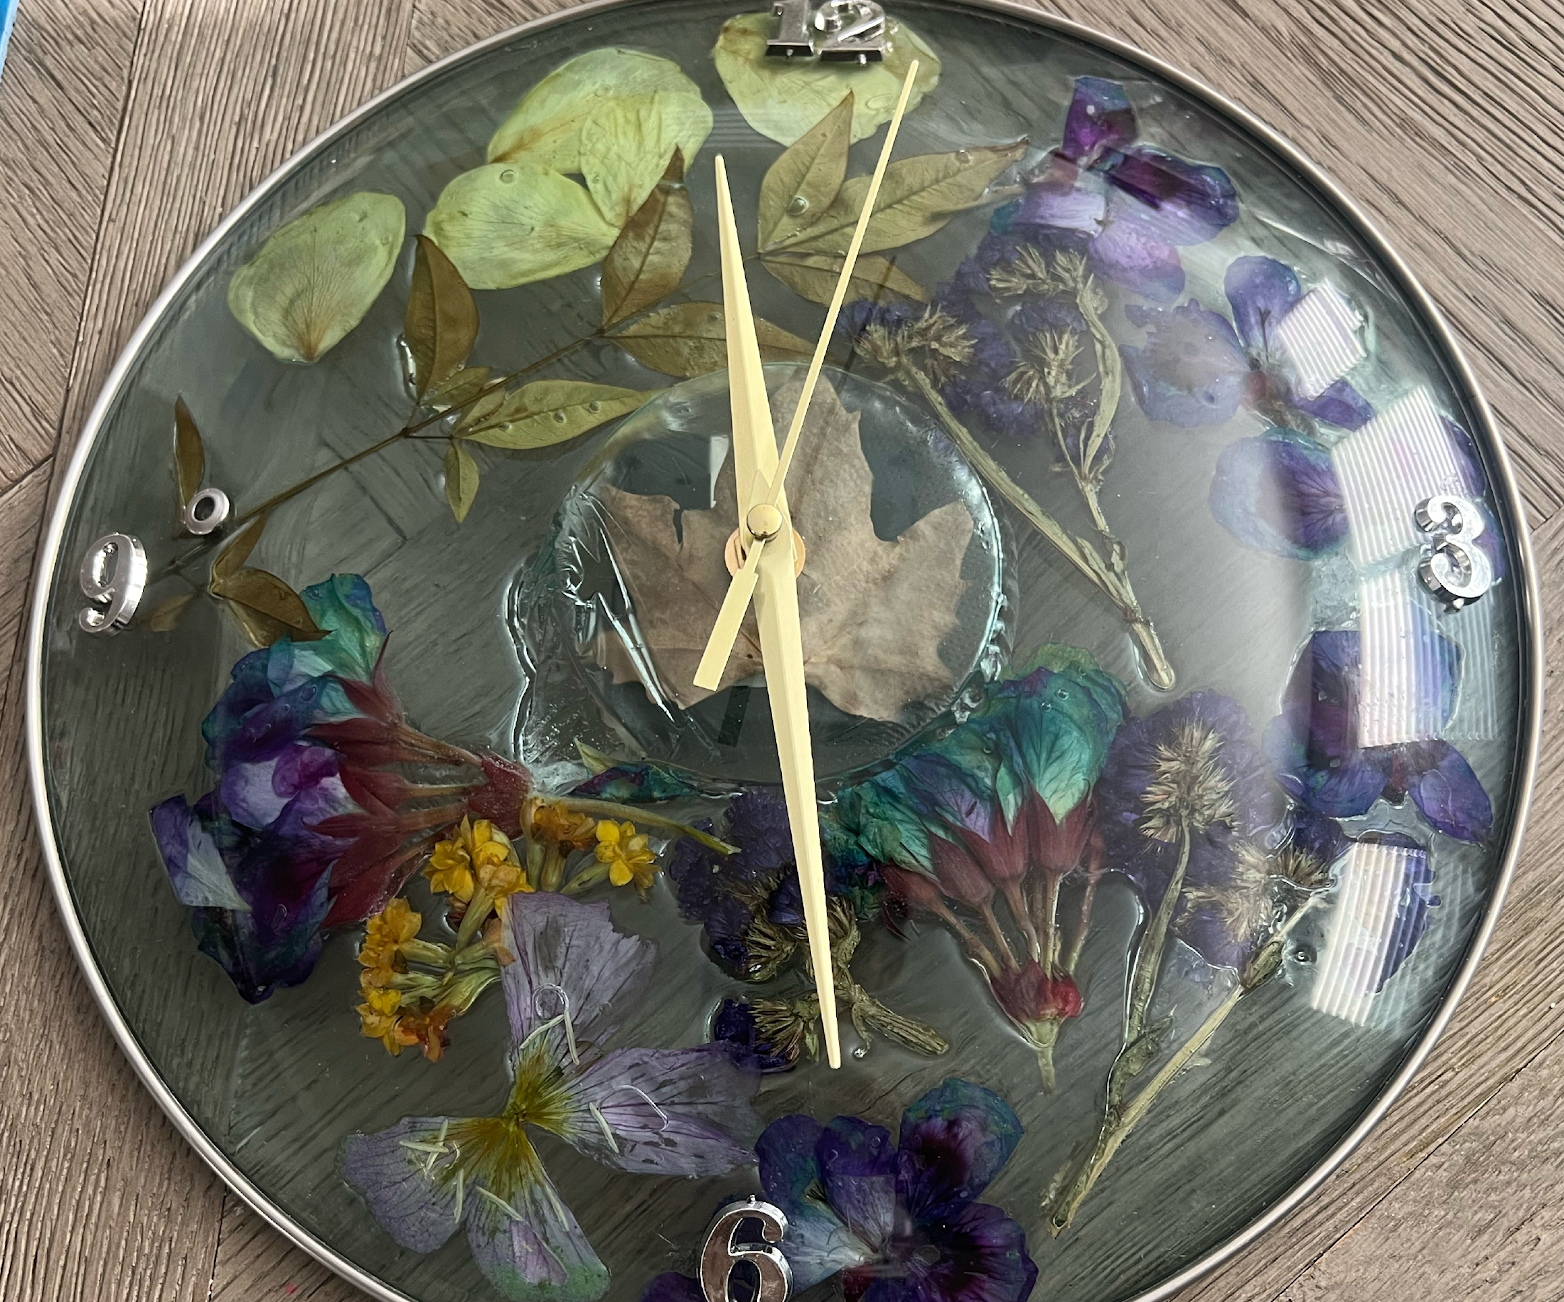 How to Make a Flower Themes Clock!